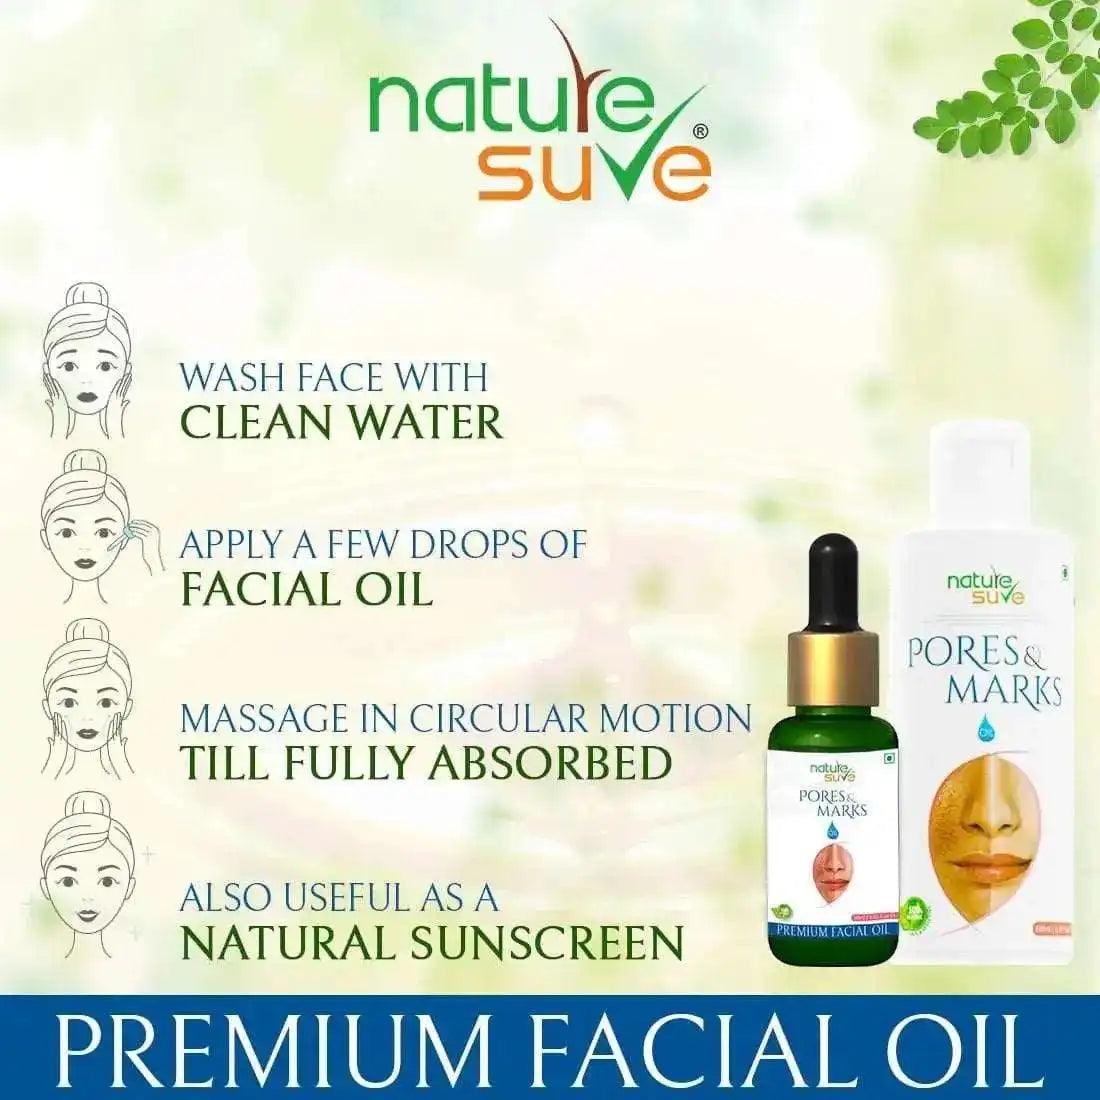 Nature Sure Pores and Marks Oil is Easy to Use - everteen-neud.com